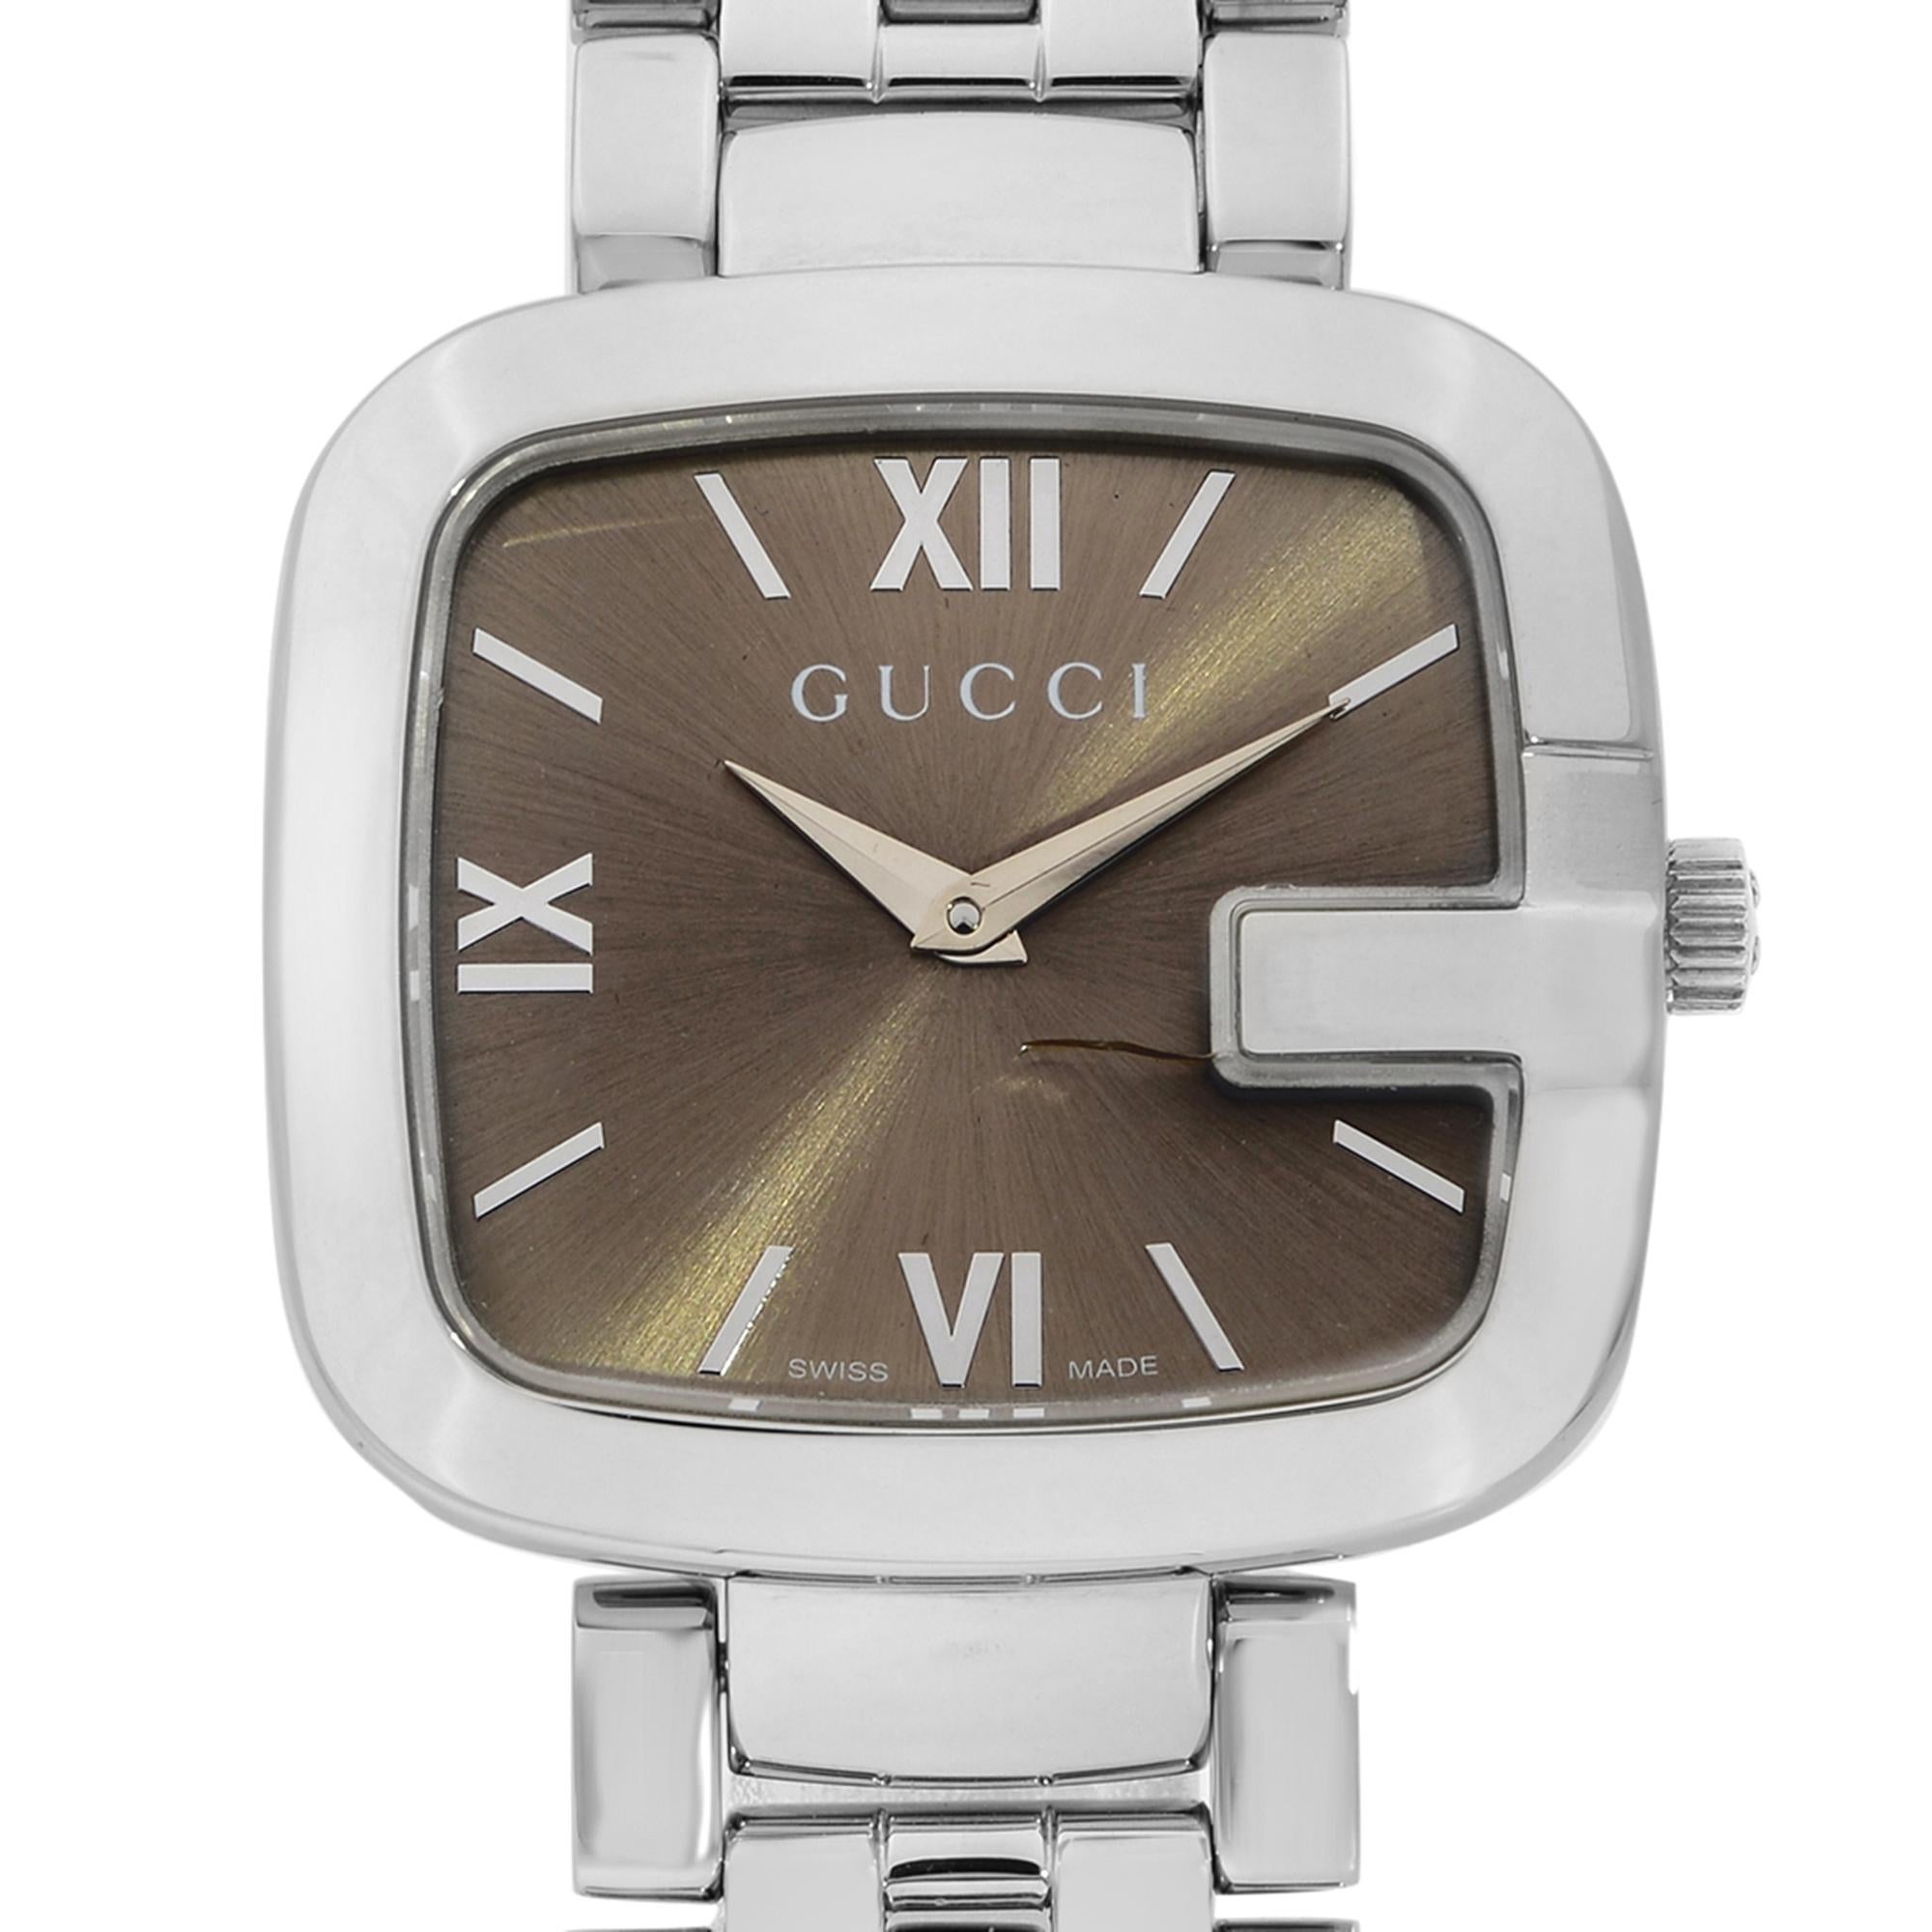 This pre-owned Gucci G-Gucci YA125410  is a beautiful Ladie's timepiece that is powered by quartz (battery) movement which is cased in a stainless steel case. It has a square shape face, no features dial and has hand sticks & numerals style markers.